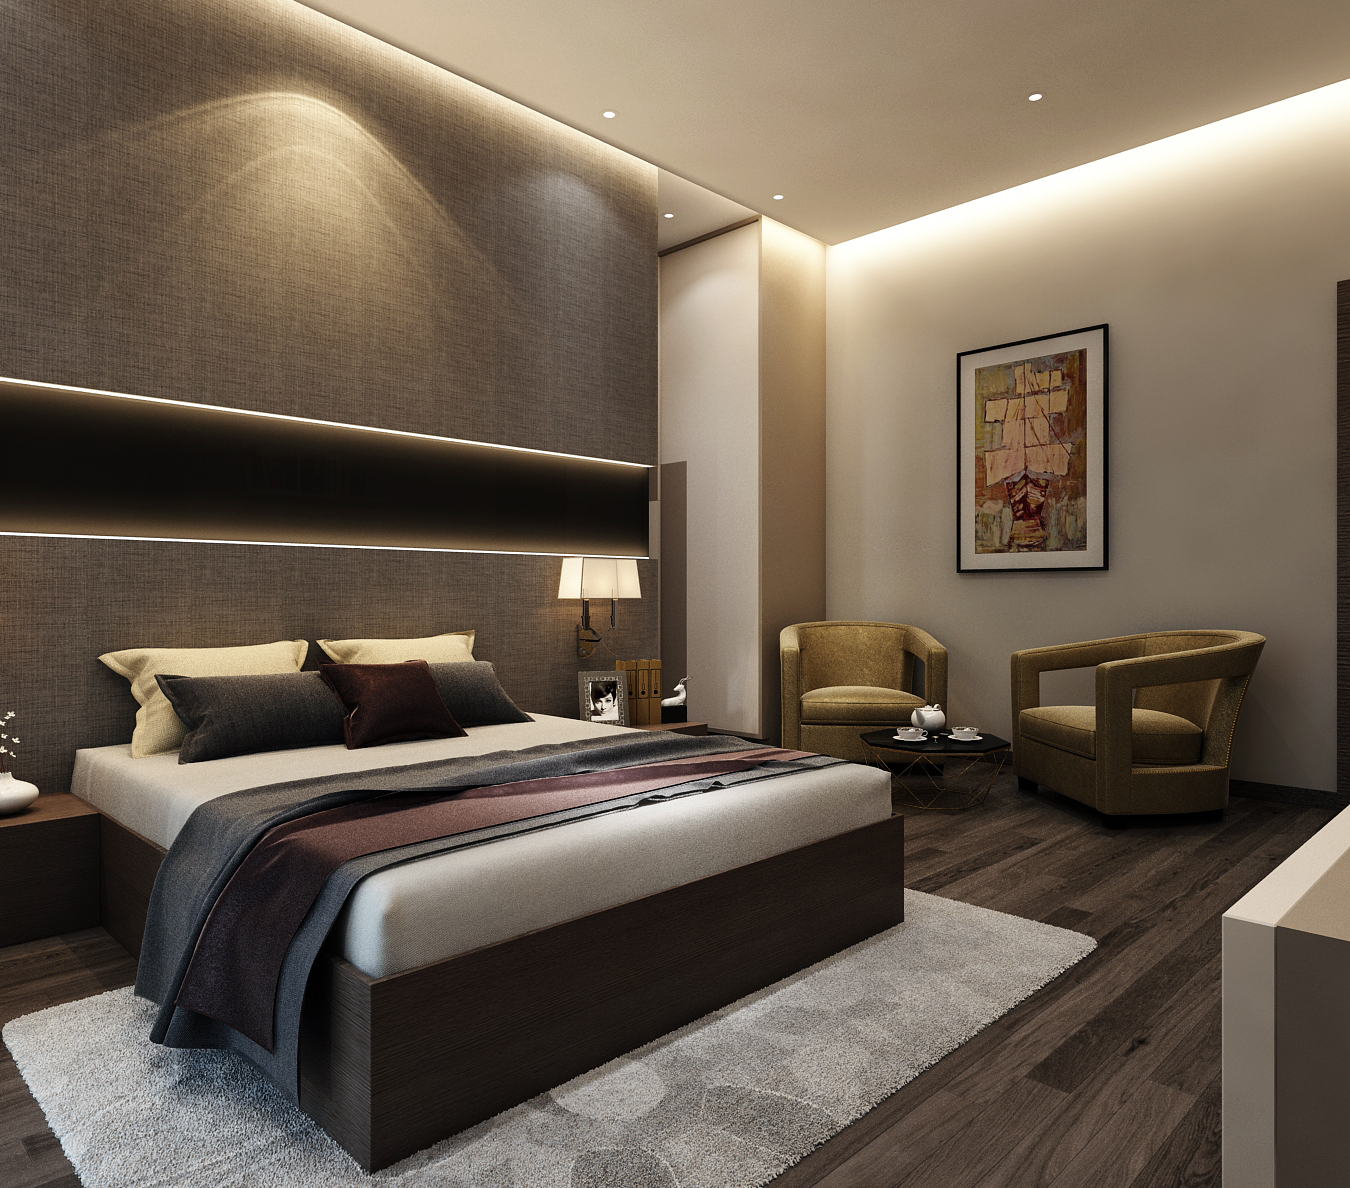 Modern Bedroom With Wall Art